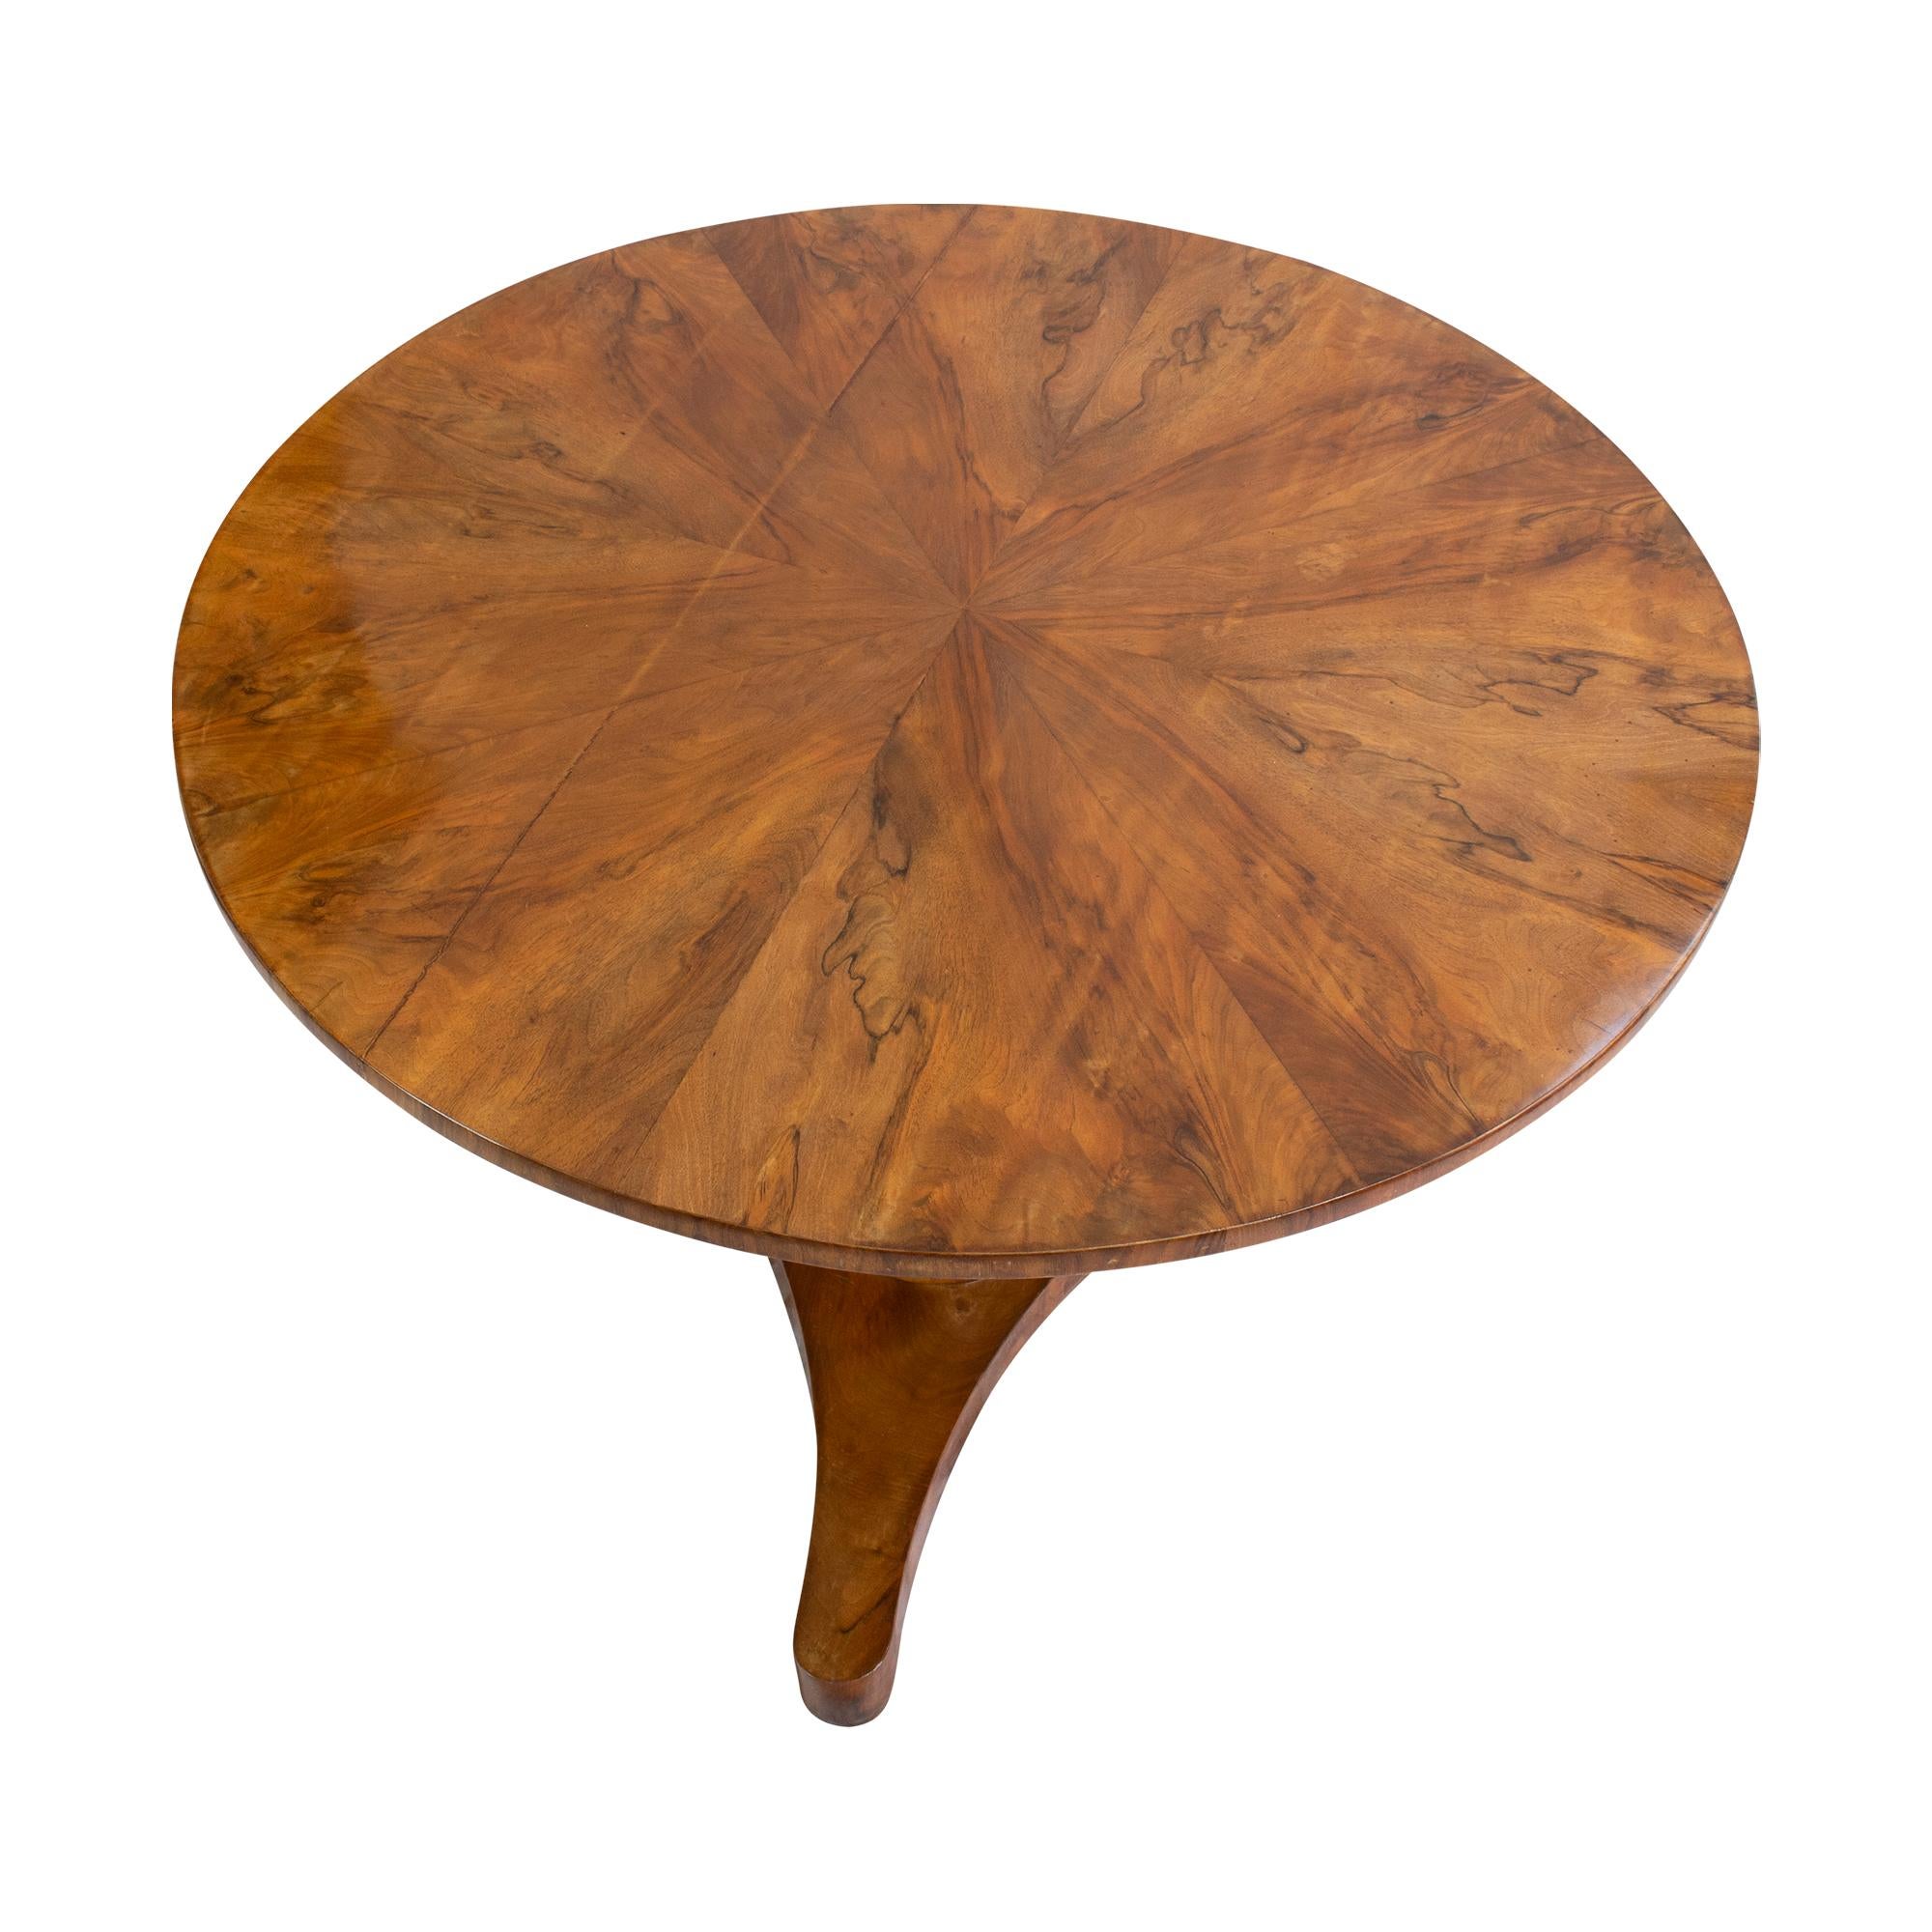 Round Biedermeier salon table from the Biedermeier period around 1820. The table is made of walnut / walnut veneer on spruce wood. The table top can be turned off without tools using the original wooden thread. The table is in a good restored